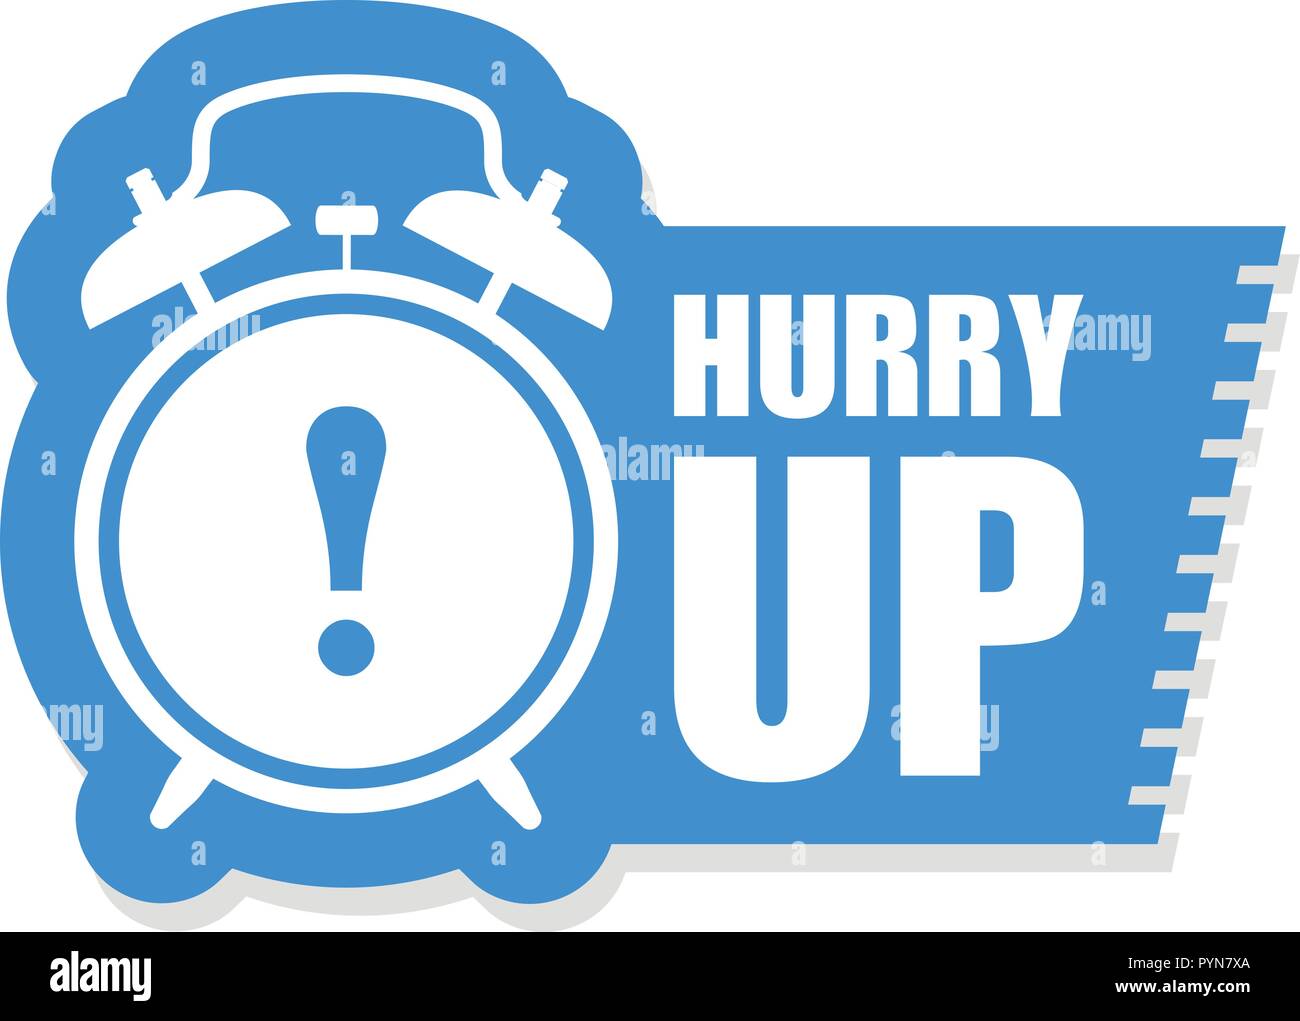 Hurry up sticker or label - sale ringing alarm clock Stock Vector